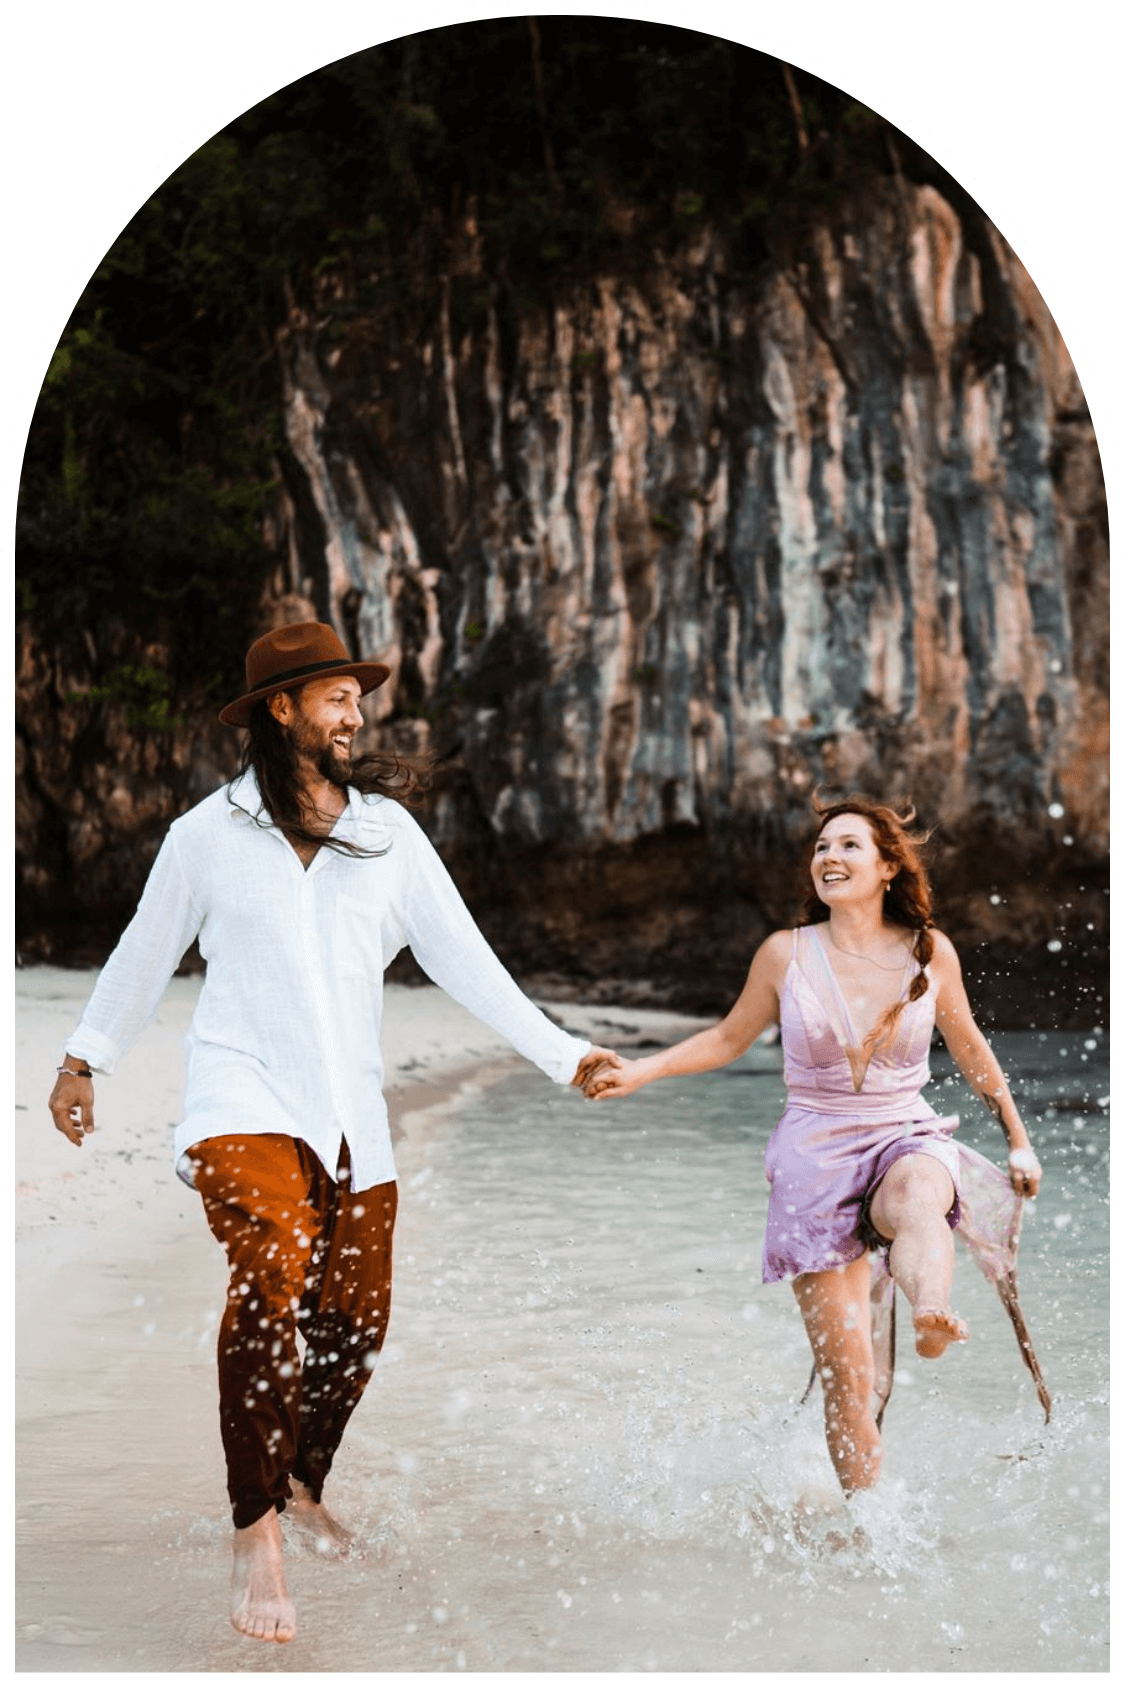 Meg and Kevin holding hands during their Thailand elopement